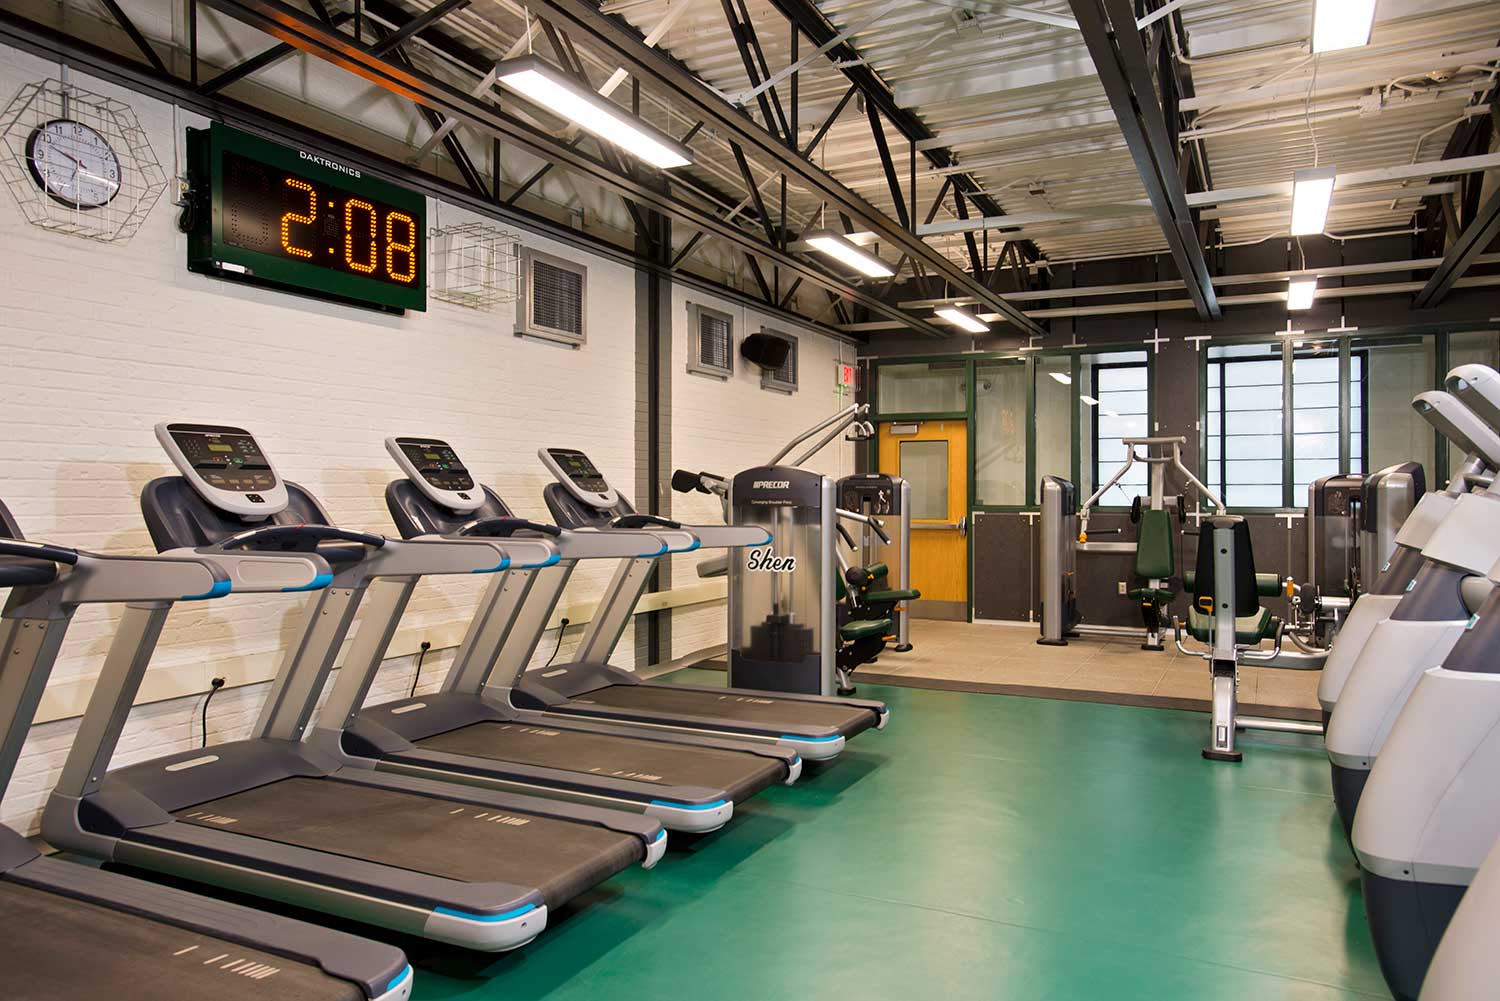 The fitness center was designed for multi-purpose and community use, with a stage for school performances and activities and public restrooms.